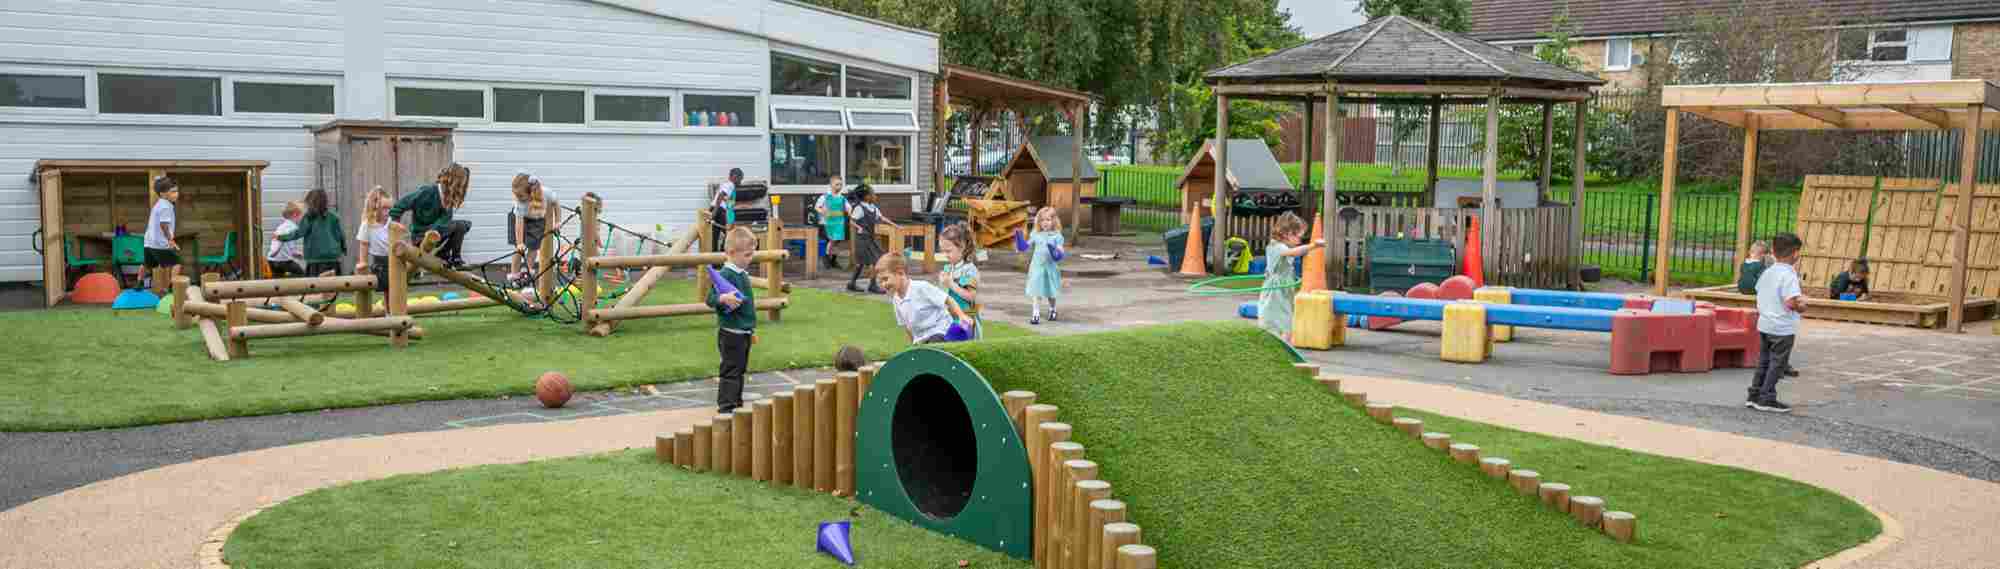 Pupils playing in the Moss Valley Primary Academy outdoor areas